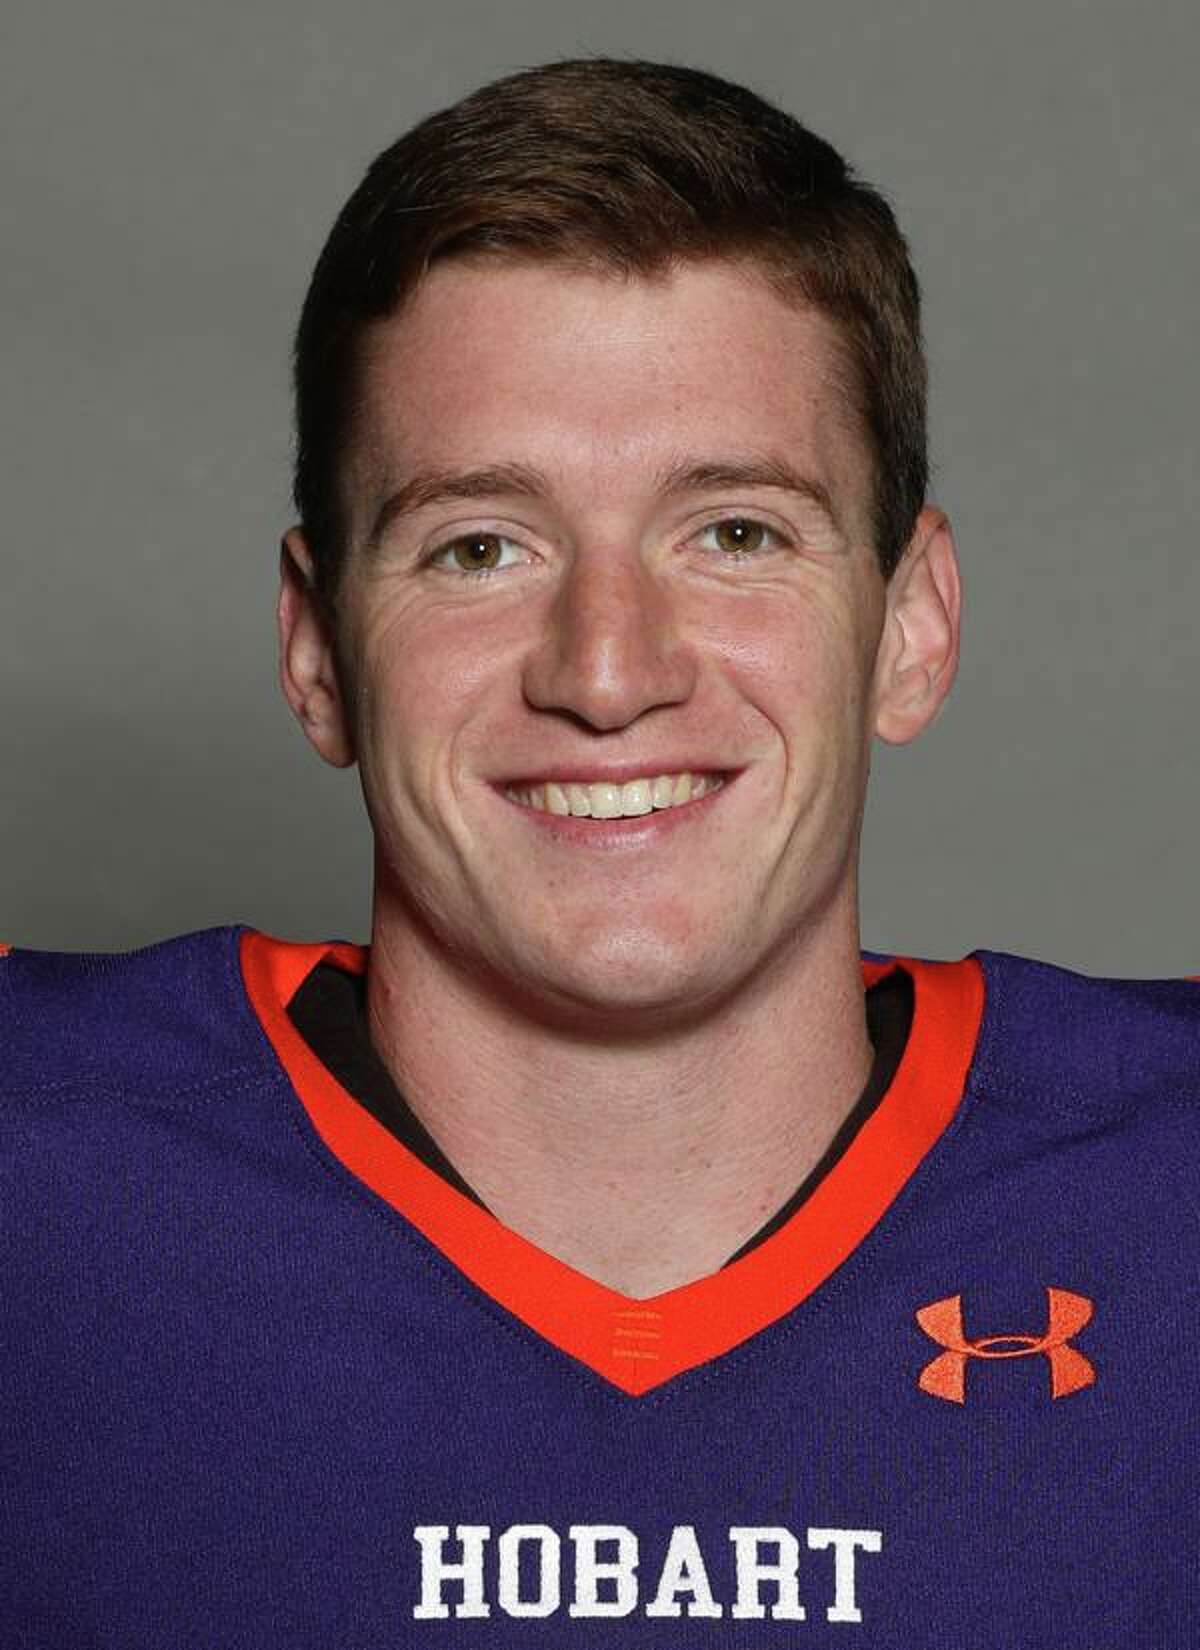 Hobart College punter John DelliSanti of Wilton was named the Liberty League Special Teams Player of the Week.